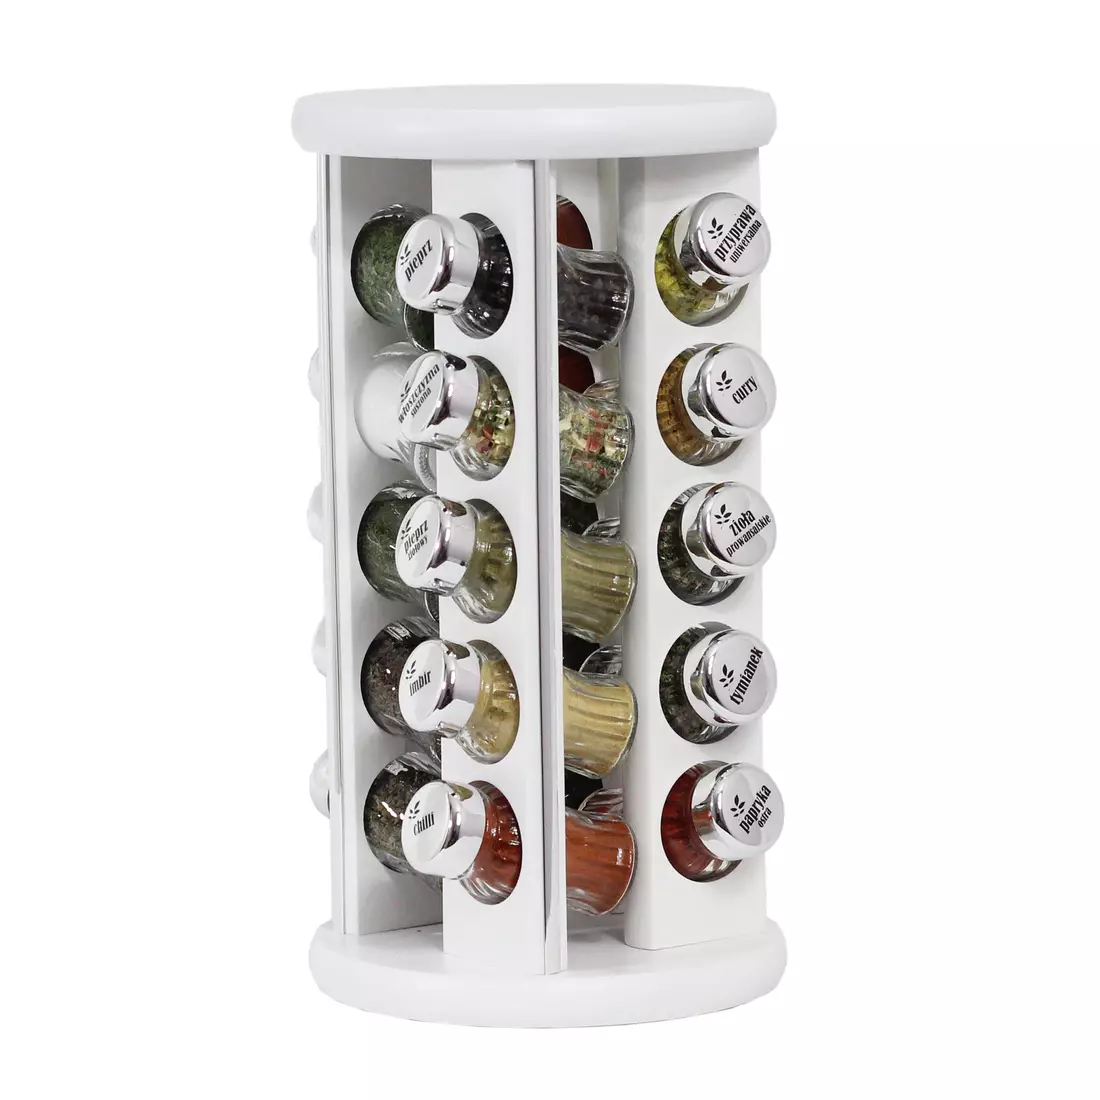 GALD SILVER LINE 20S spice rack white gloss